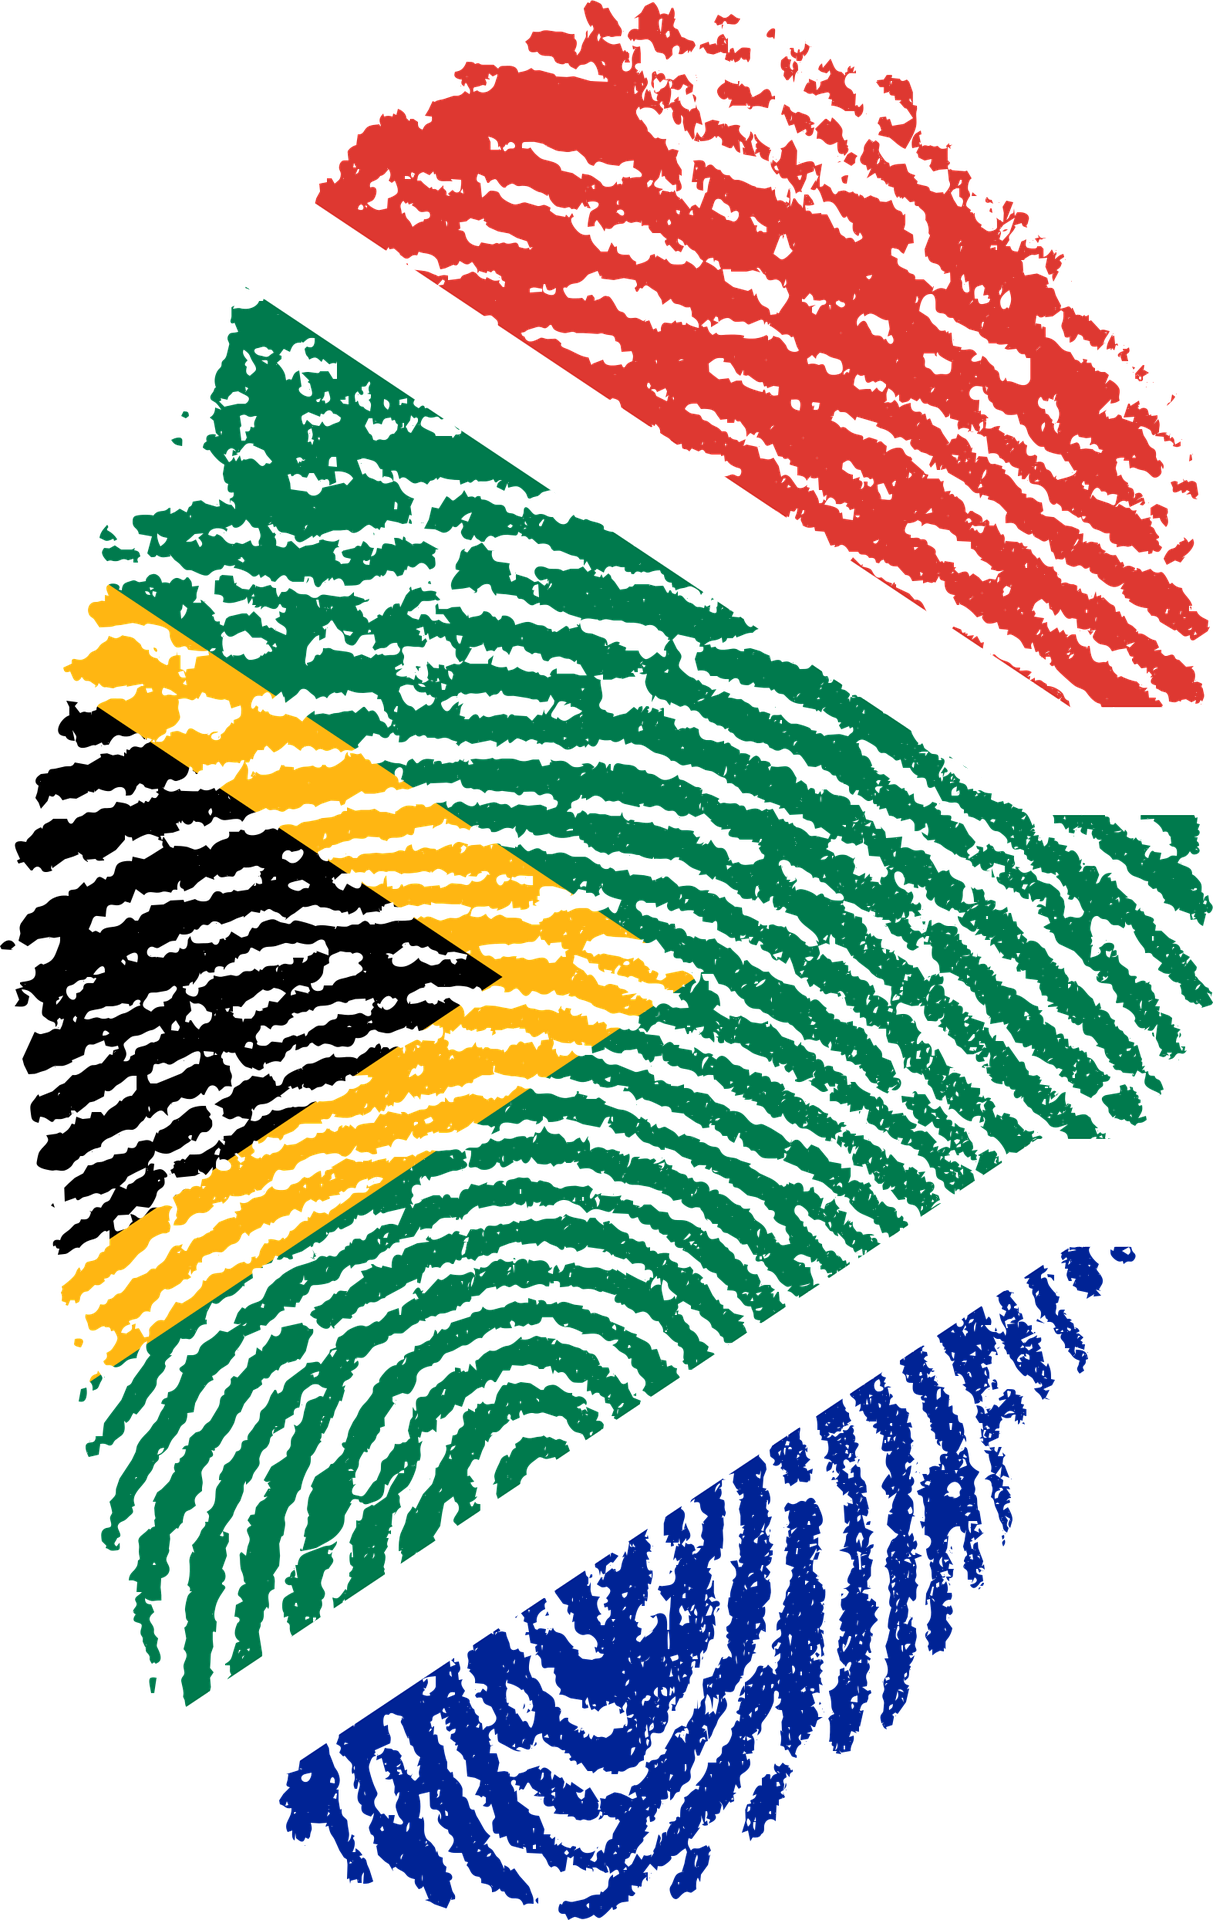 Full Day Soweto & Apartheid Museum - Transparent South African Flag Png (1213x1920)